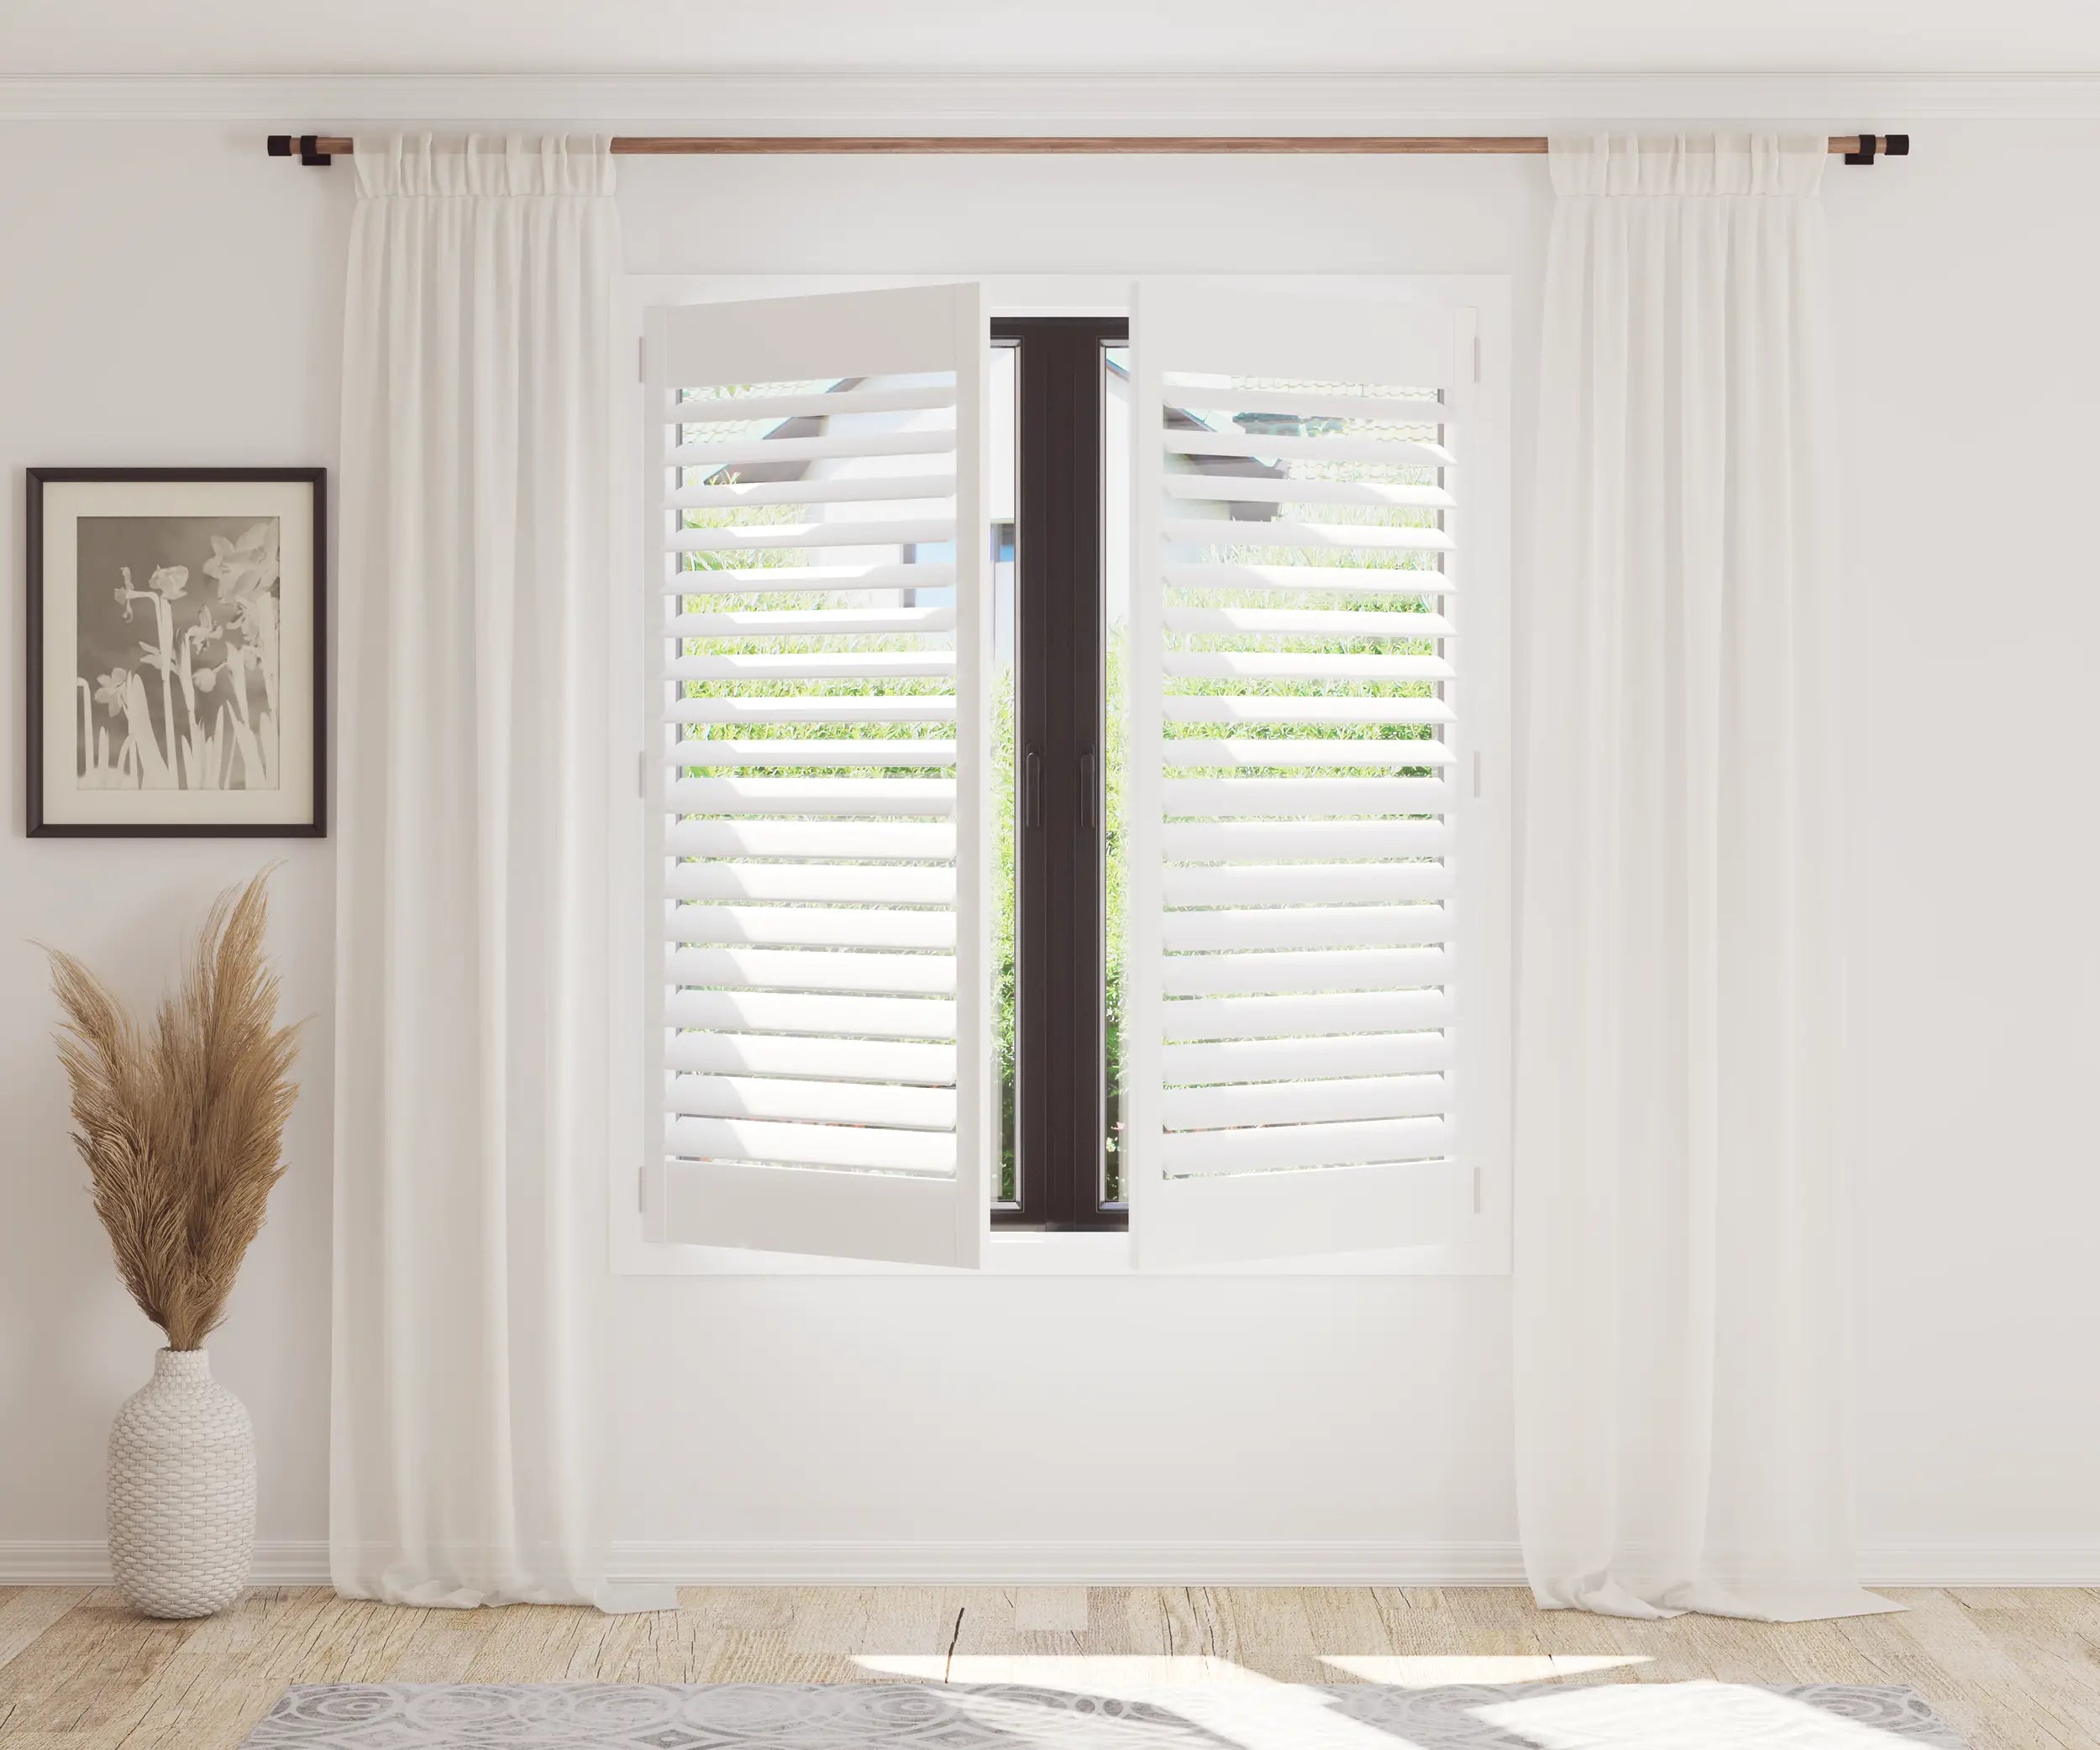 Balancing Light and Privacy: A Guide to Combining Sheer Curtains with Shutters